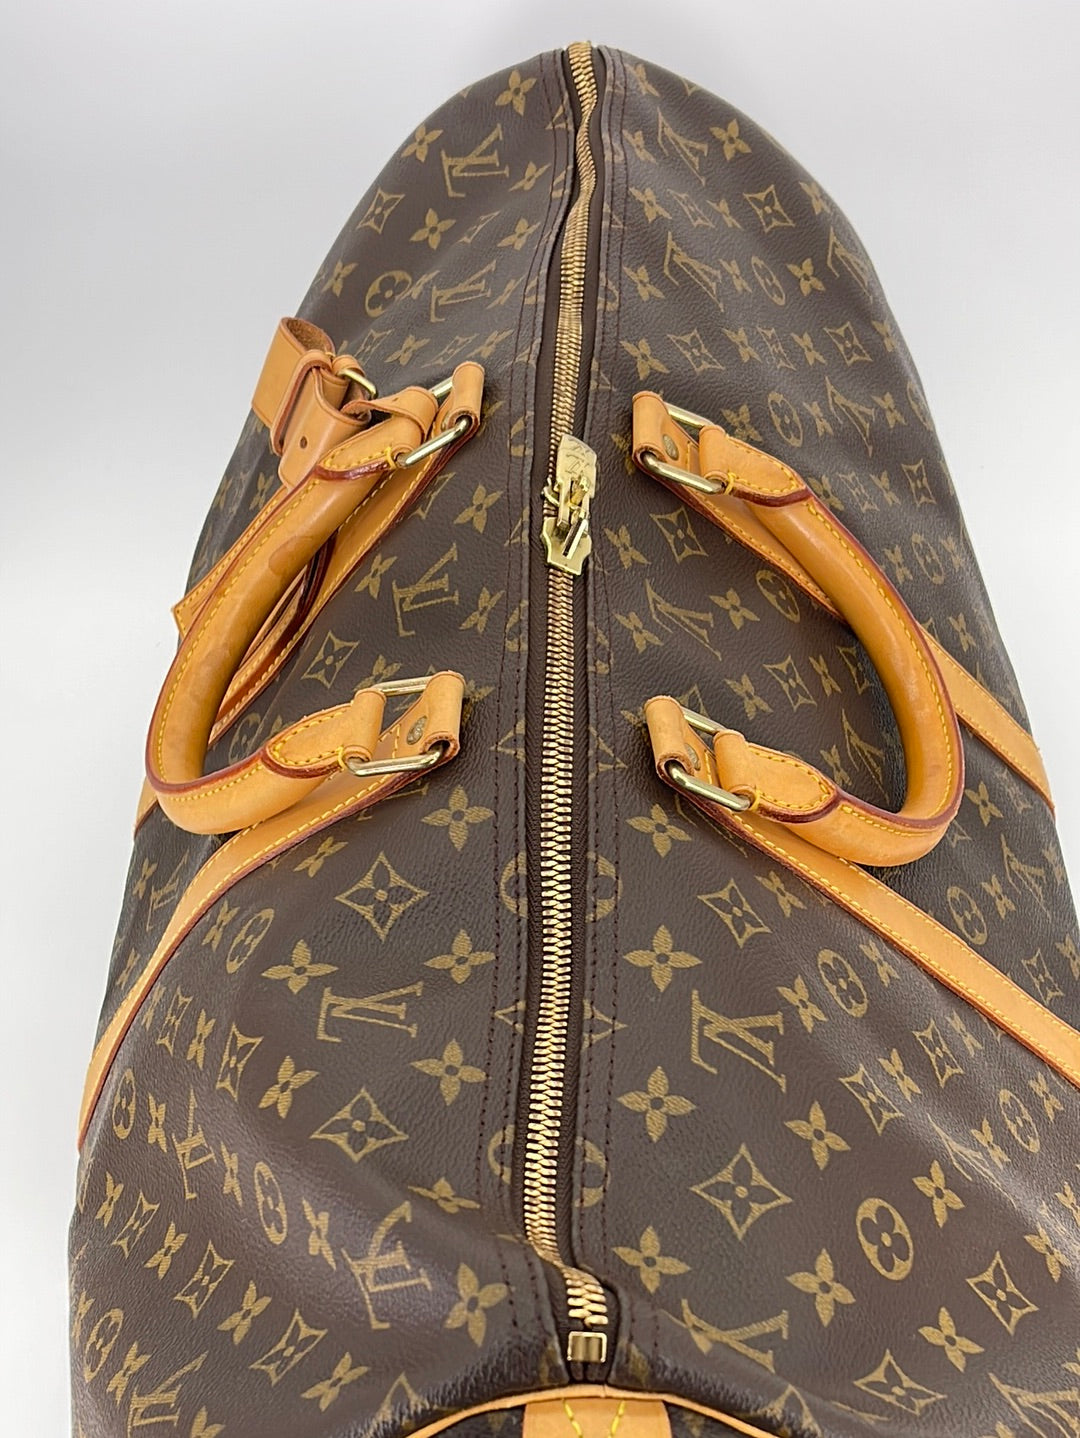 🎄 Never too late to shop this preloved LOUIS VUITTON Keepall 55